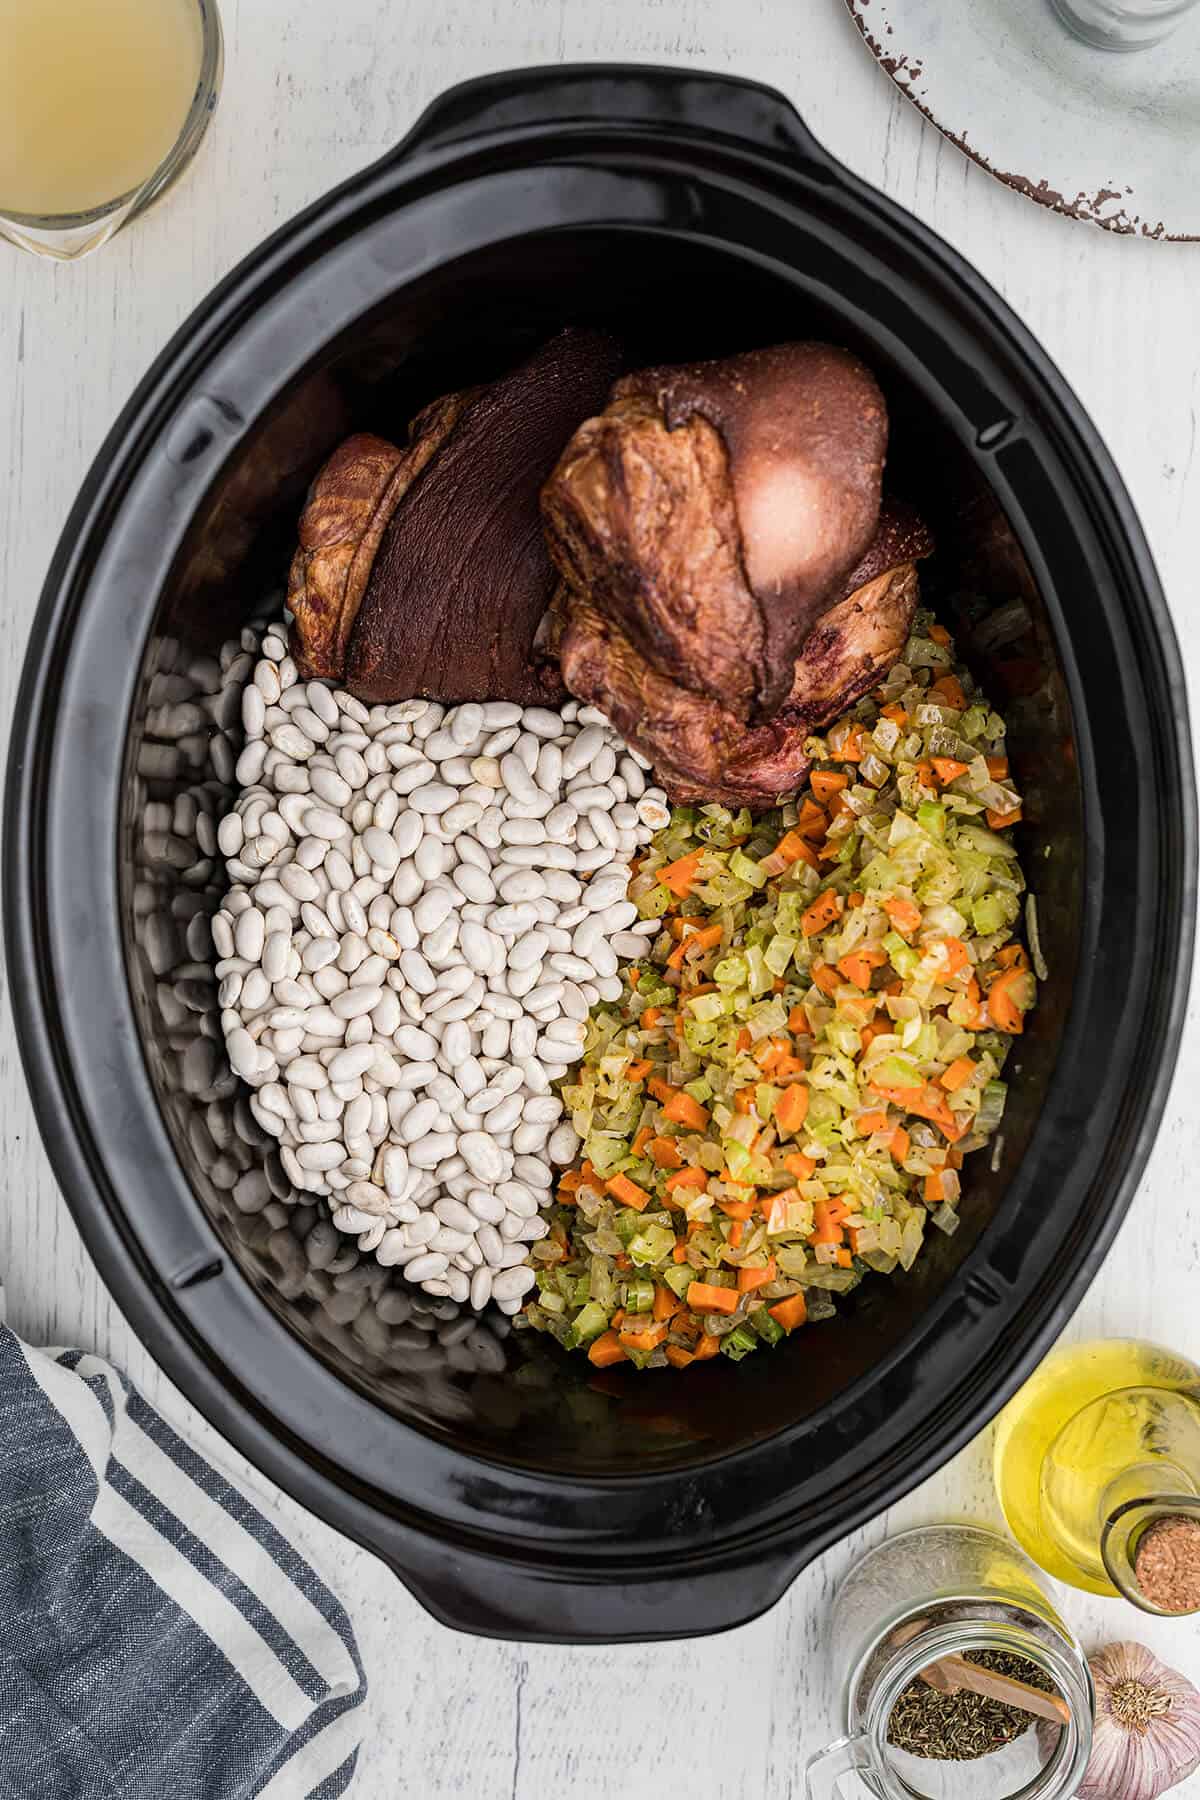 Sauteed vegetables, dried beans, and ham hocks in a slow cooker.